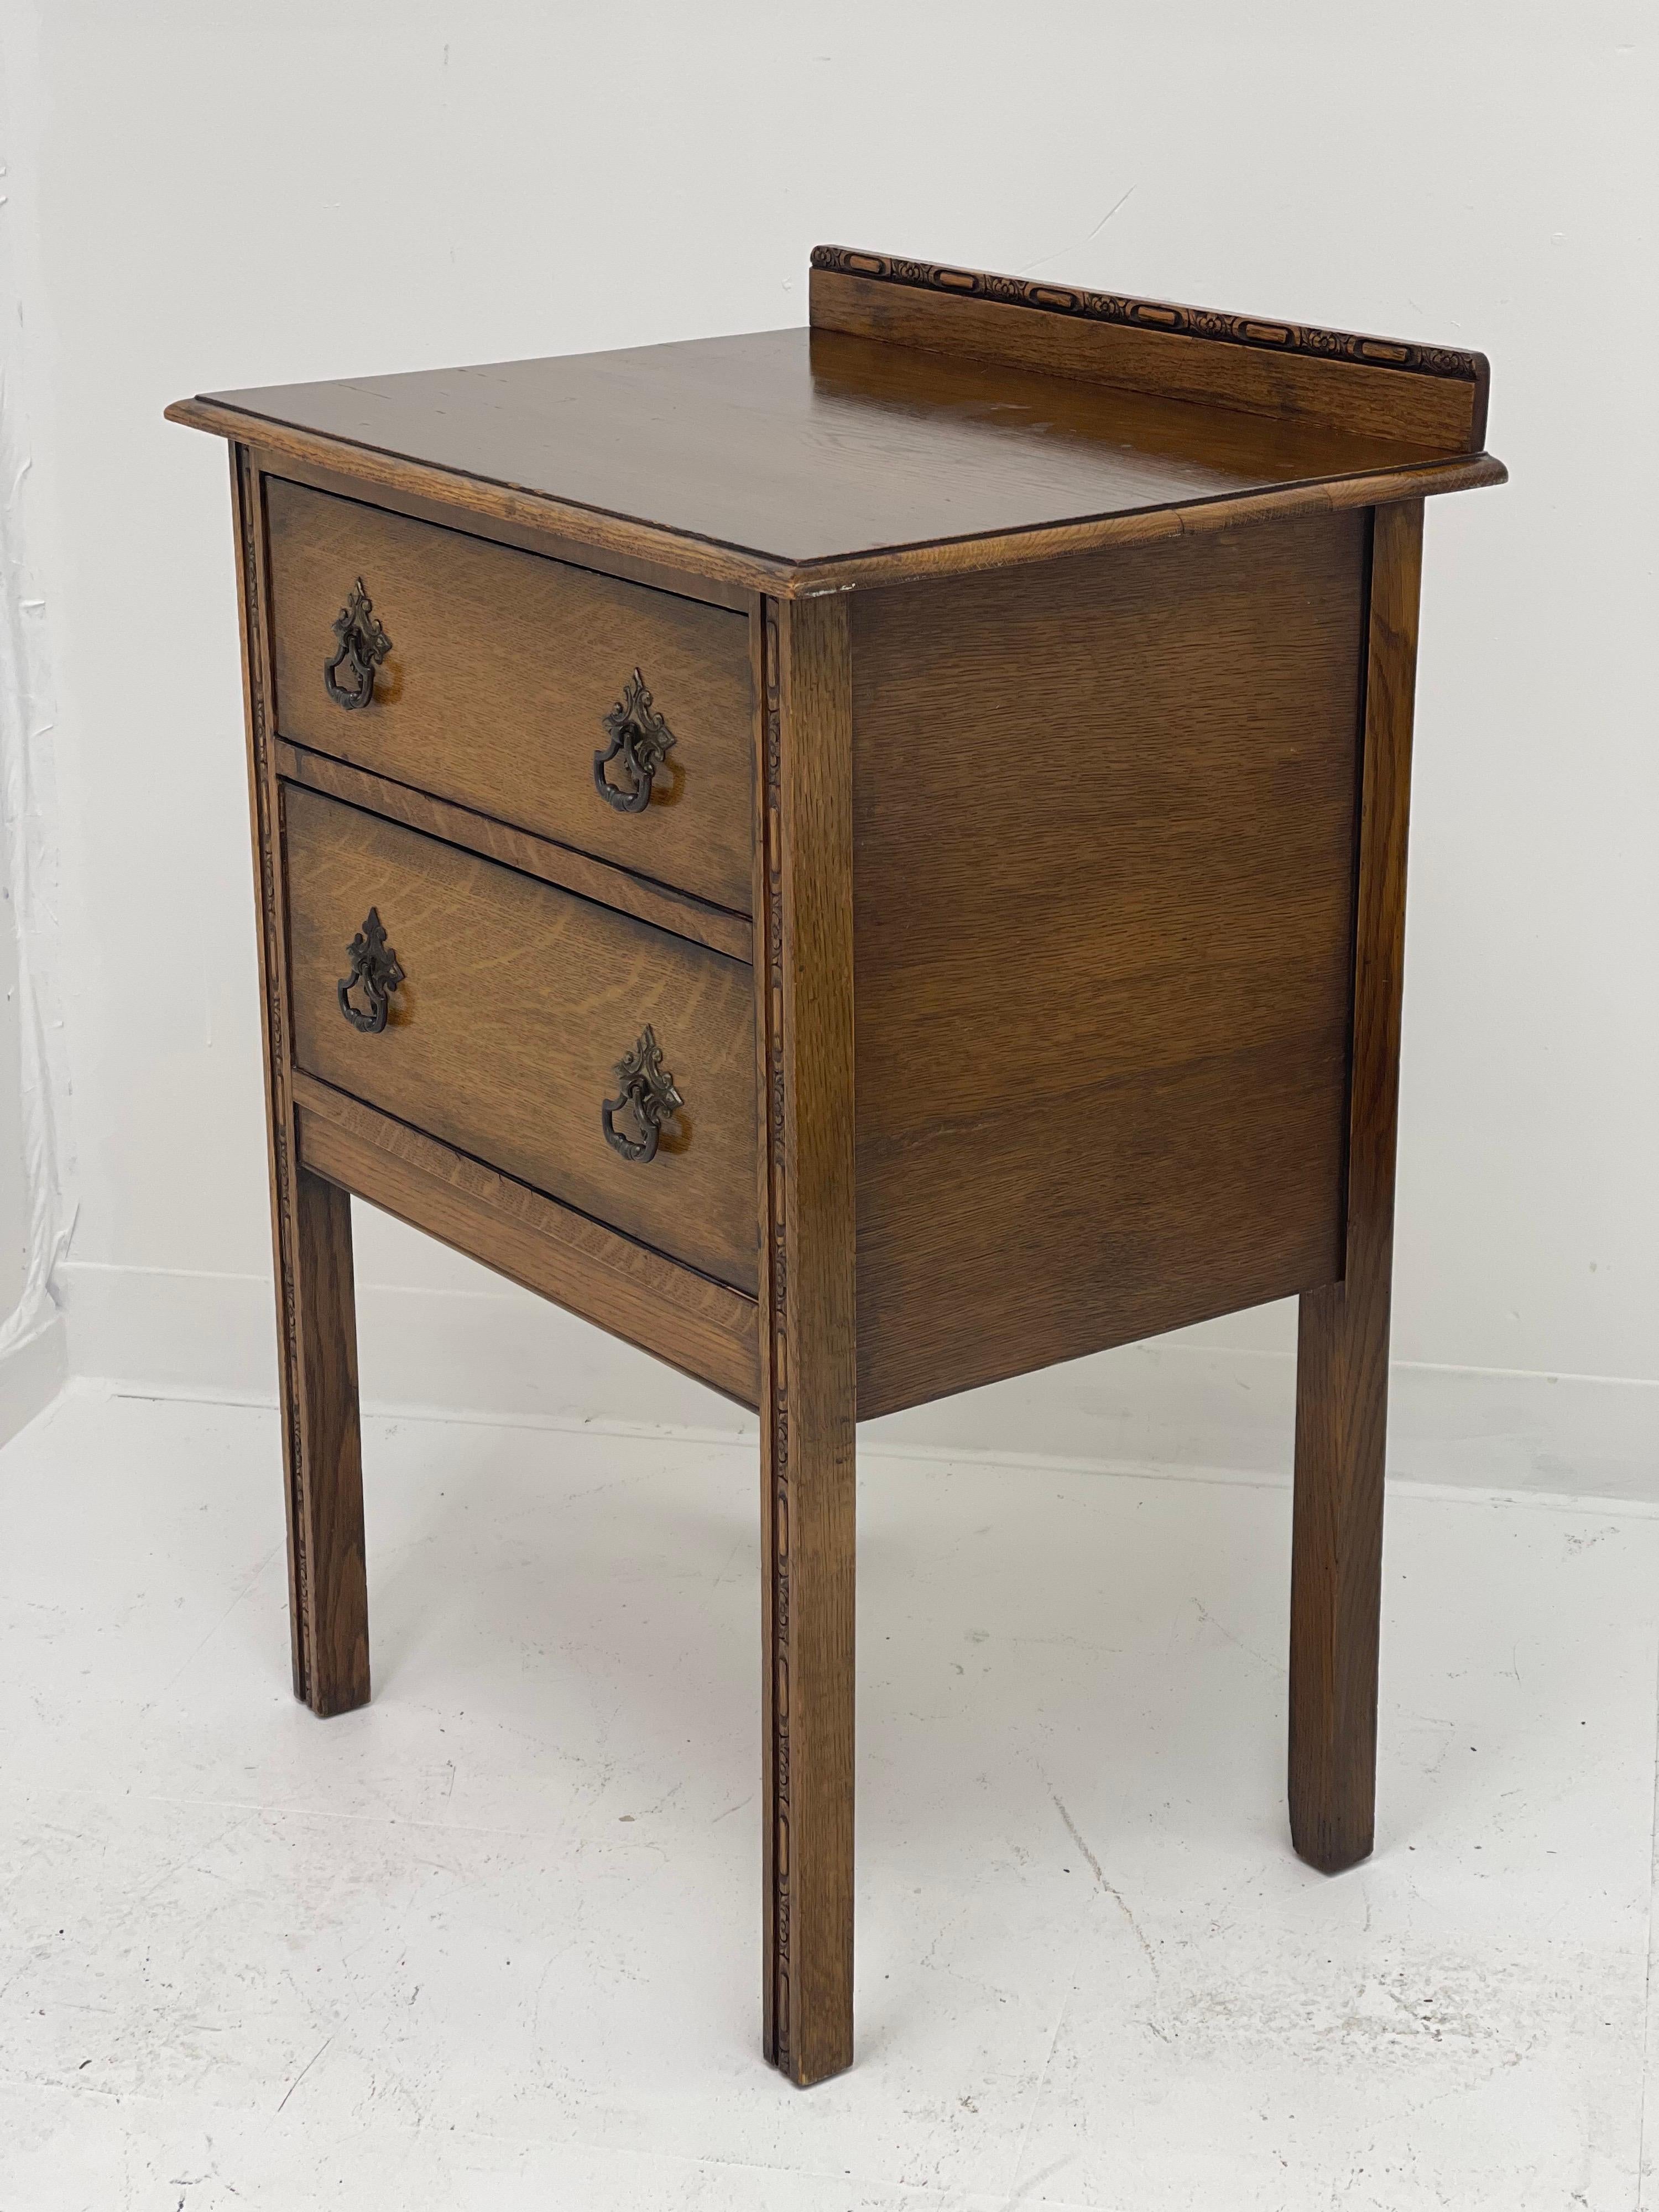 American Classical Vintage Early American Oak Accent Table or Endtable with Drawers For Sale